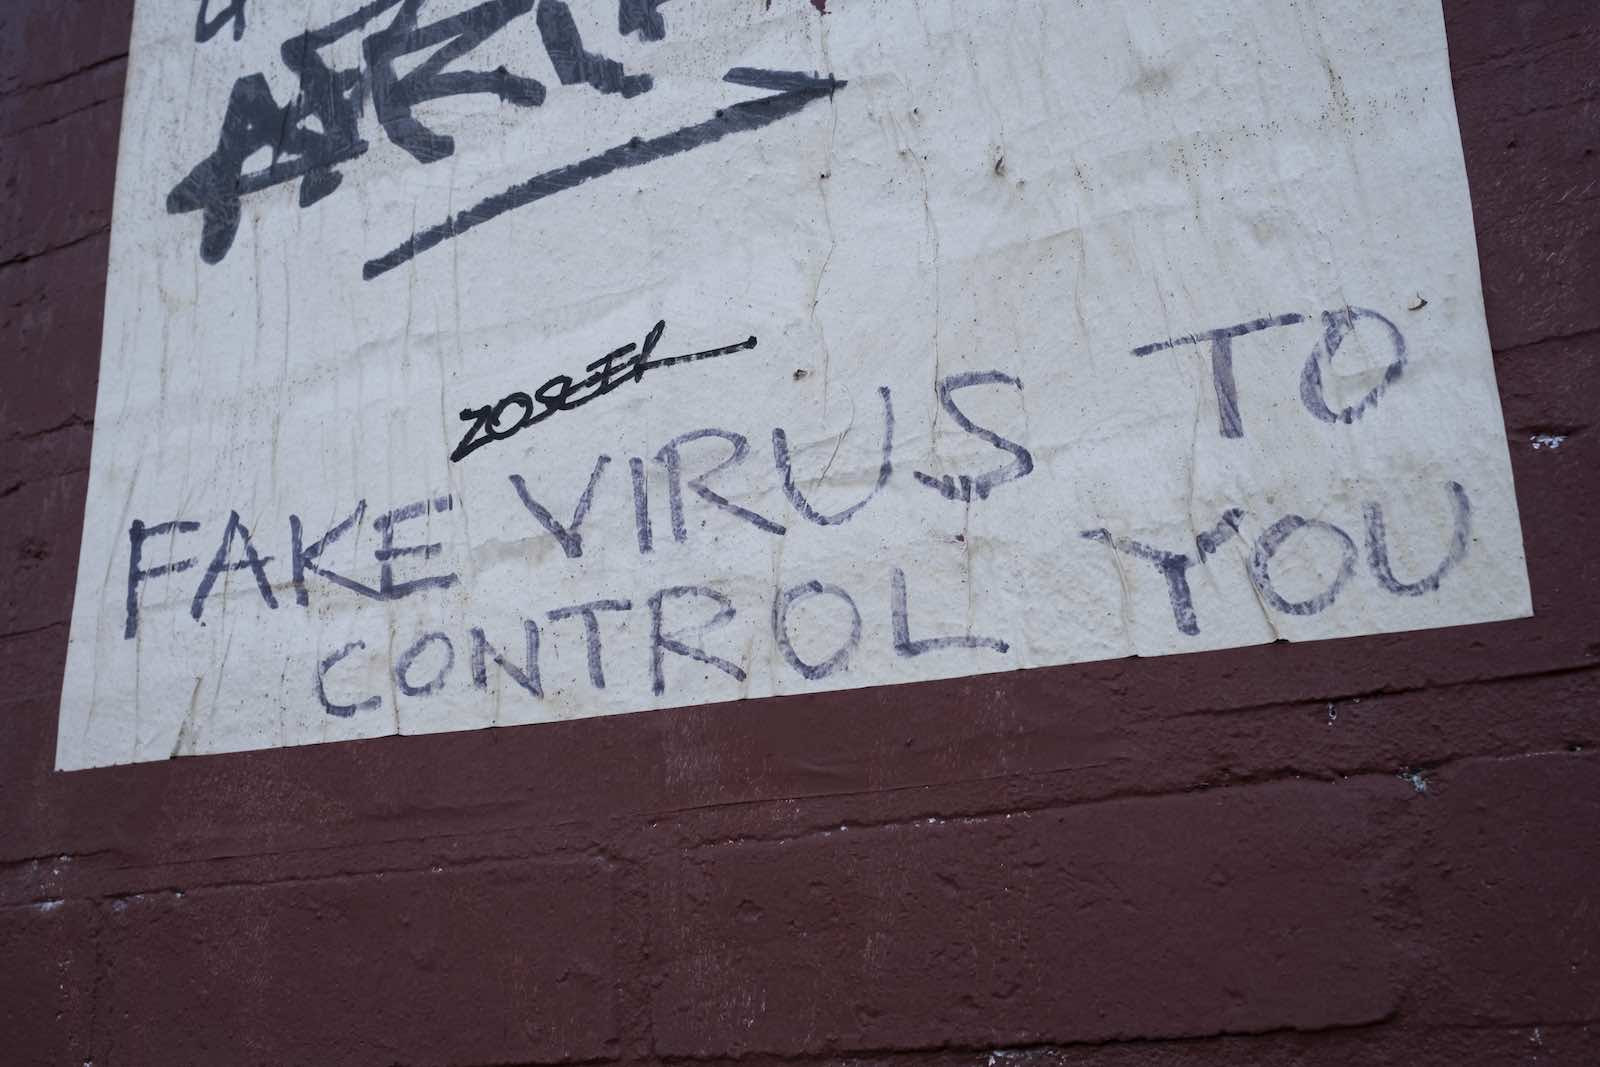 Graffiti on the side of a building that says “fake virus to control you”